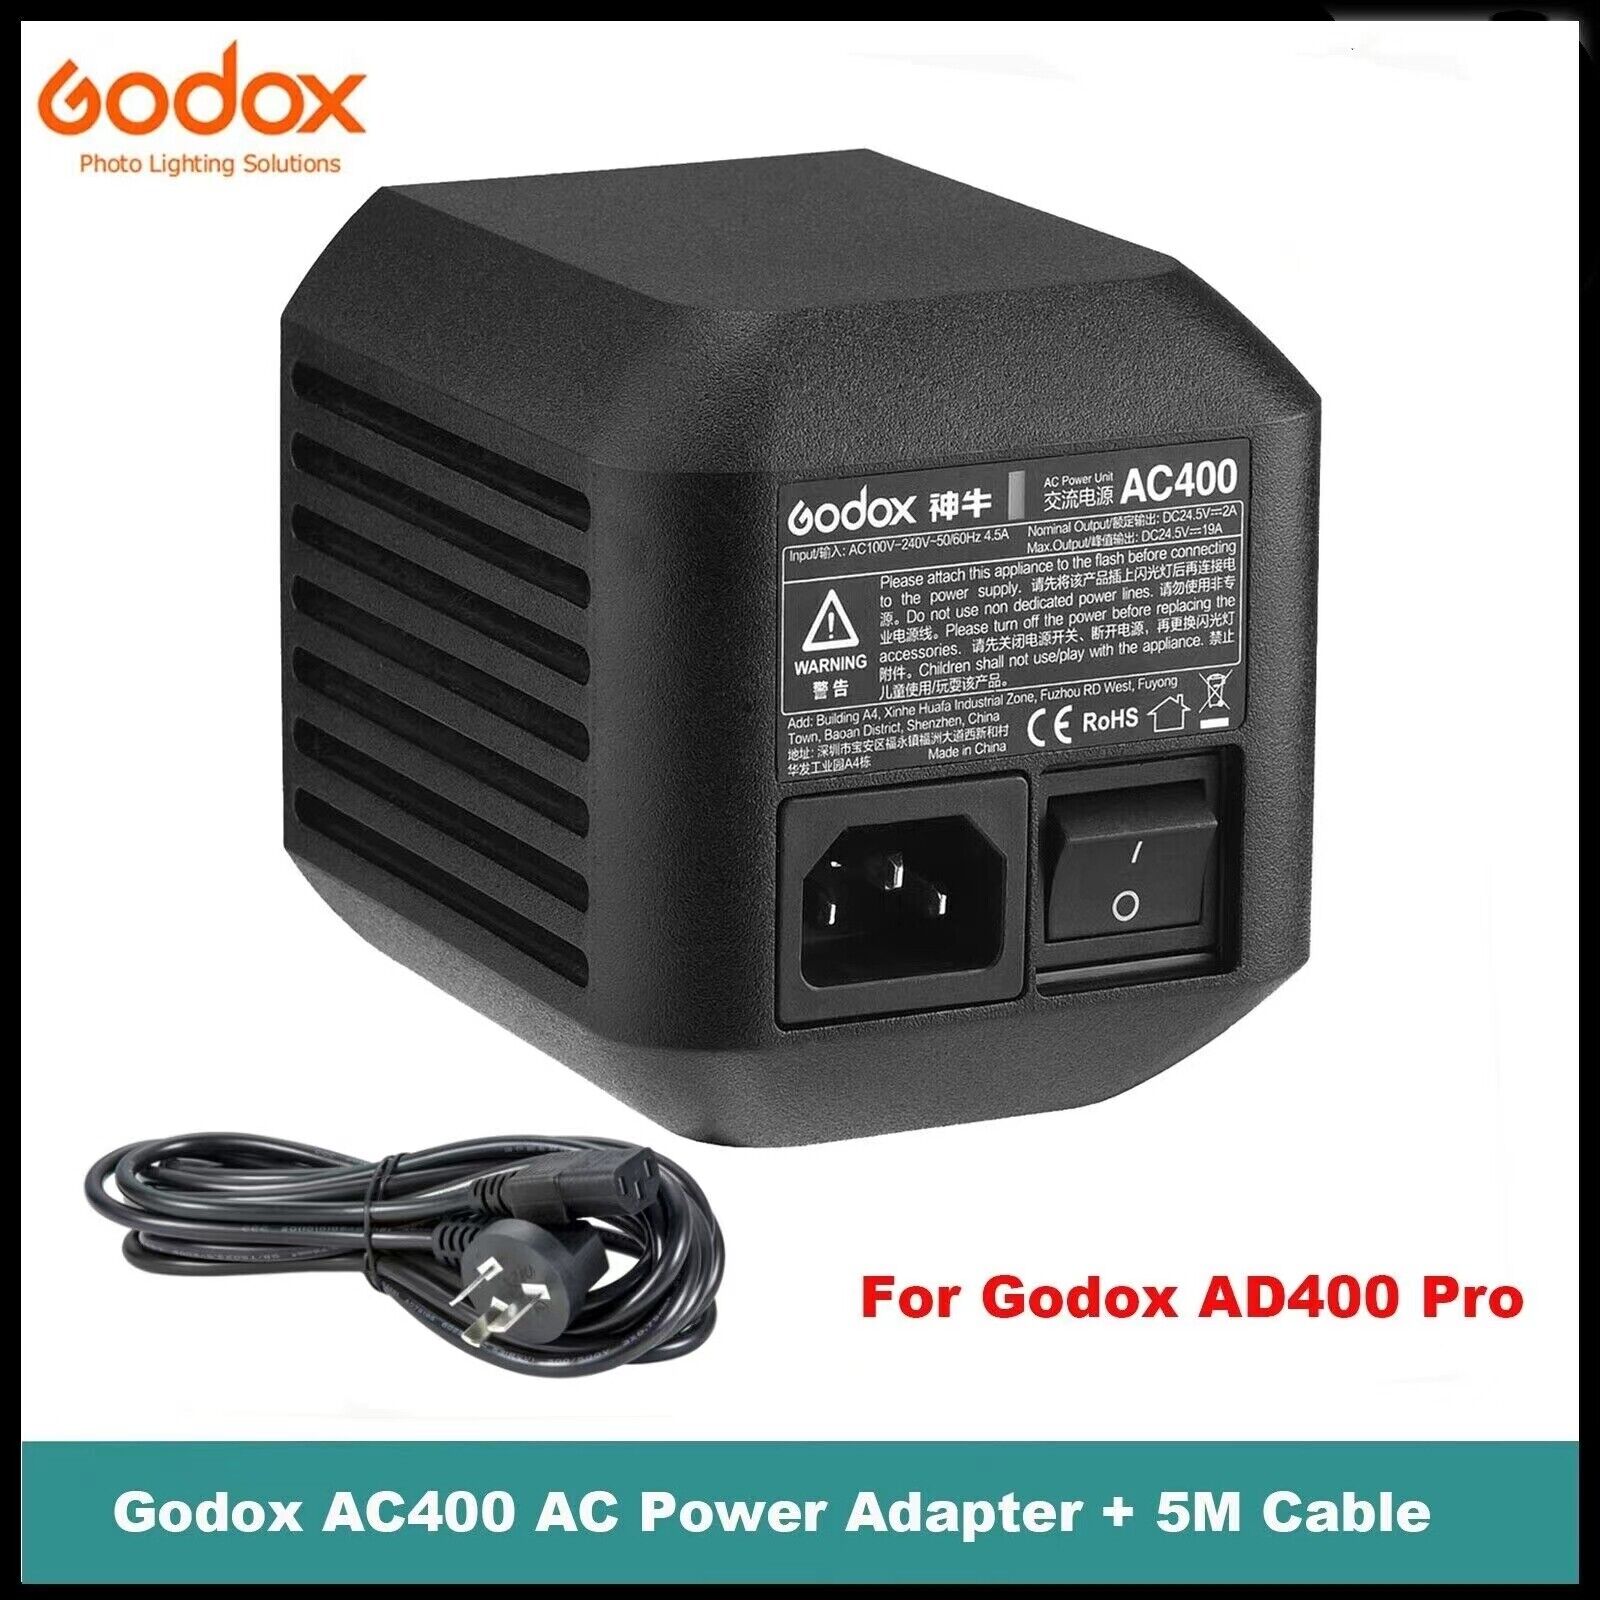 Godox AC400 AC Power Unit Source Adapter with 5m Cable for Godox AD400 Pro Flash